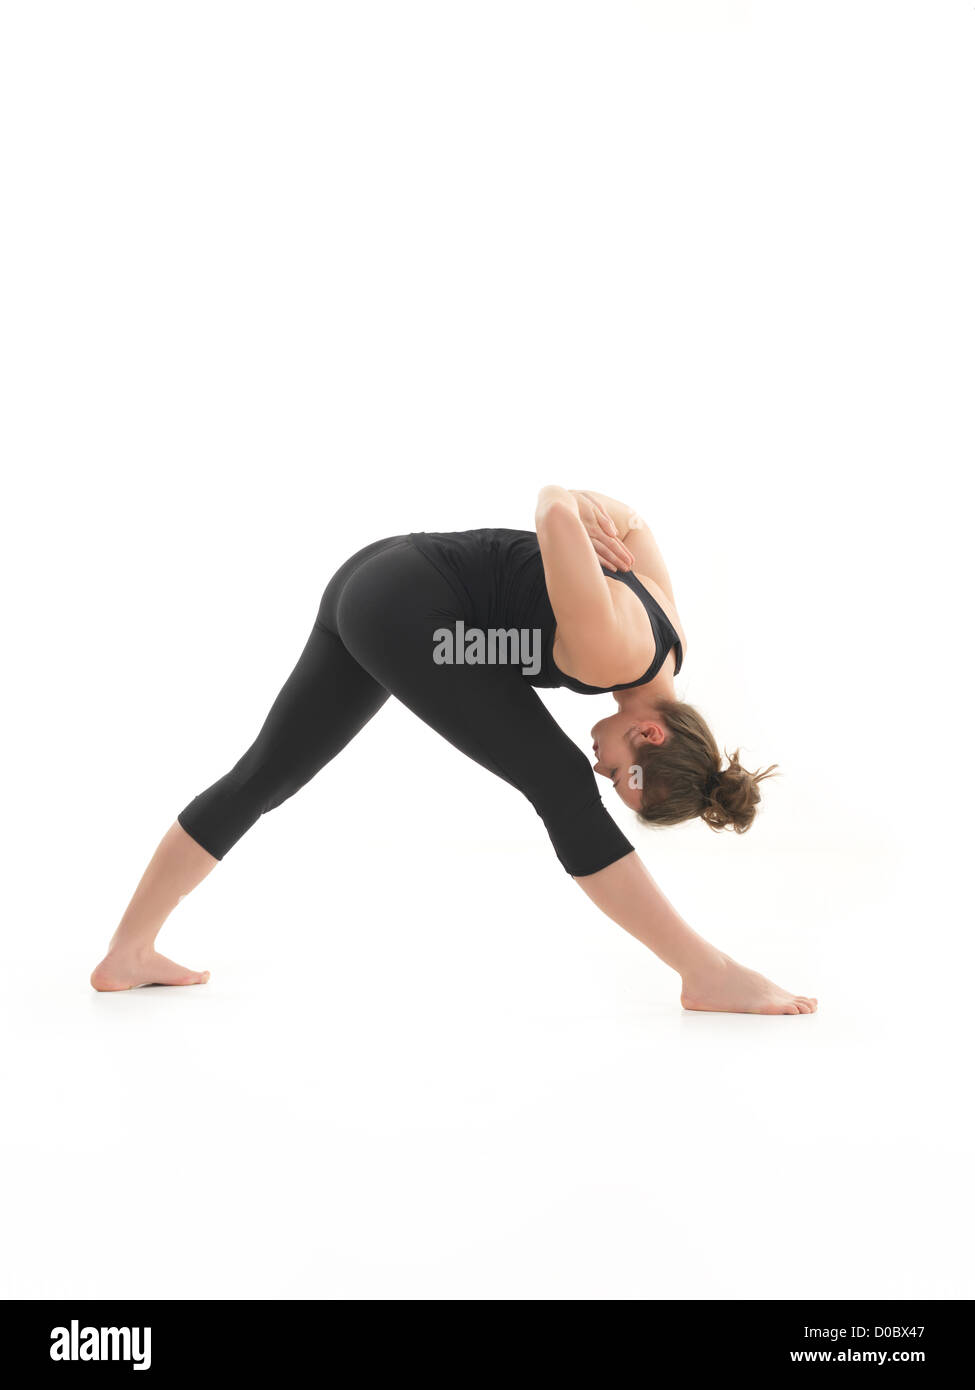 young, blonde woman practicing yoga posture, with face obscured, ressed in black, on white blackground Stock Photo